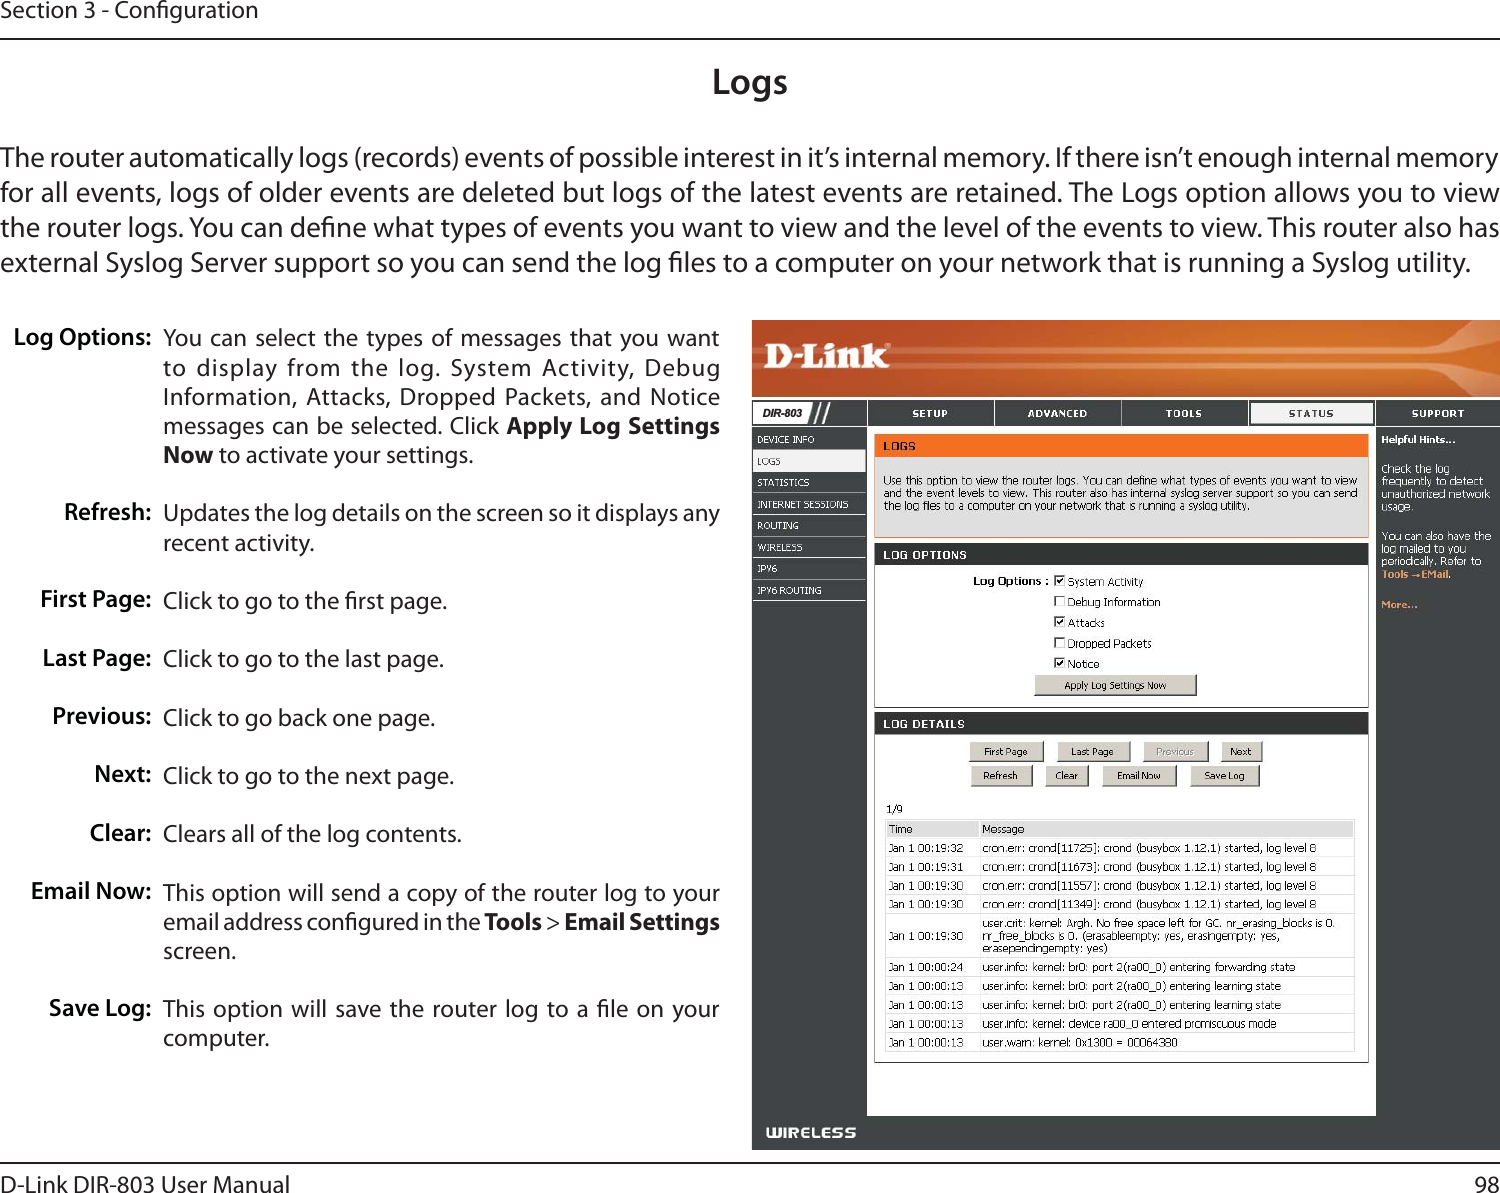 98D-Link DIR-803 User ManualSection 3 - CongurationLogsLog Options:Refresh:First Page:Last Page:Previous:Next:Clear:Email Now:Save Log:You can select the types of messages that you want to display from the log. System Activity, Debug Information, Attacks, Dropped Packets, and Notice messages can be selected. Click Apply Log Settings Now to activate your settings.Updates the log details on the screen so it displays any recent activity.Click to go to the rst page.Click to go to the last page.Click to go back one page.Click to go to the next page.Clears all of the log contents.This option will send a copy of the router log to your email address congured in the Tools &gt; Email Settings screen.This option will save the router log to a le on your computer.The router automatically logs (records) events of possible interest in it’s internal memory. If there isn’t enough internal memory for all events, logs of older events are deleted but logs of the latest events are retained. The Logs option allows you to view the router logs. You can dene what types of events you want to view and the level of the events to view. This router also has external Syslog Server support so you can send the log les to a computer on your network that is running a Syslog utility.&apos;,5